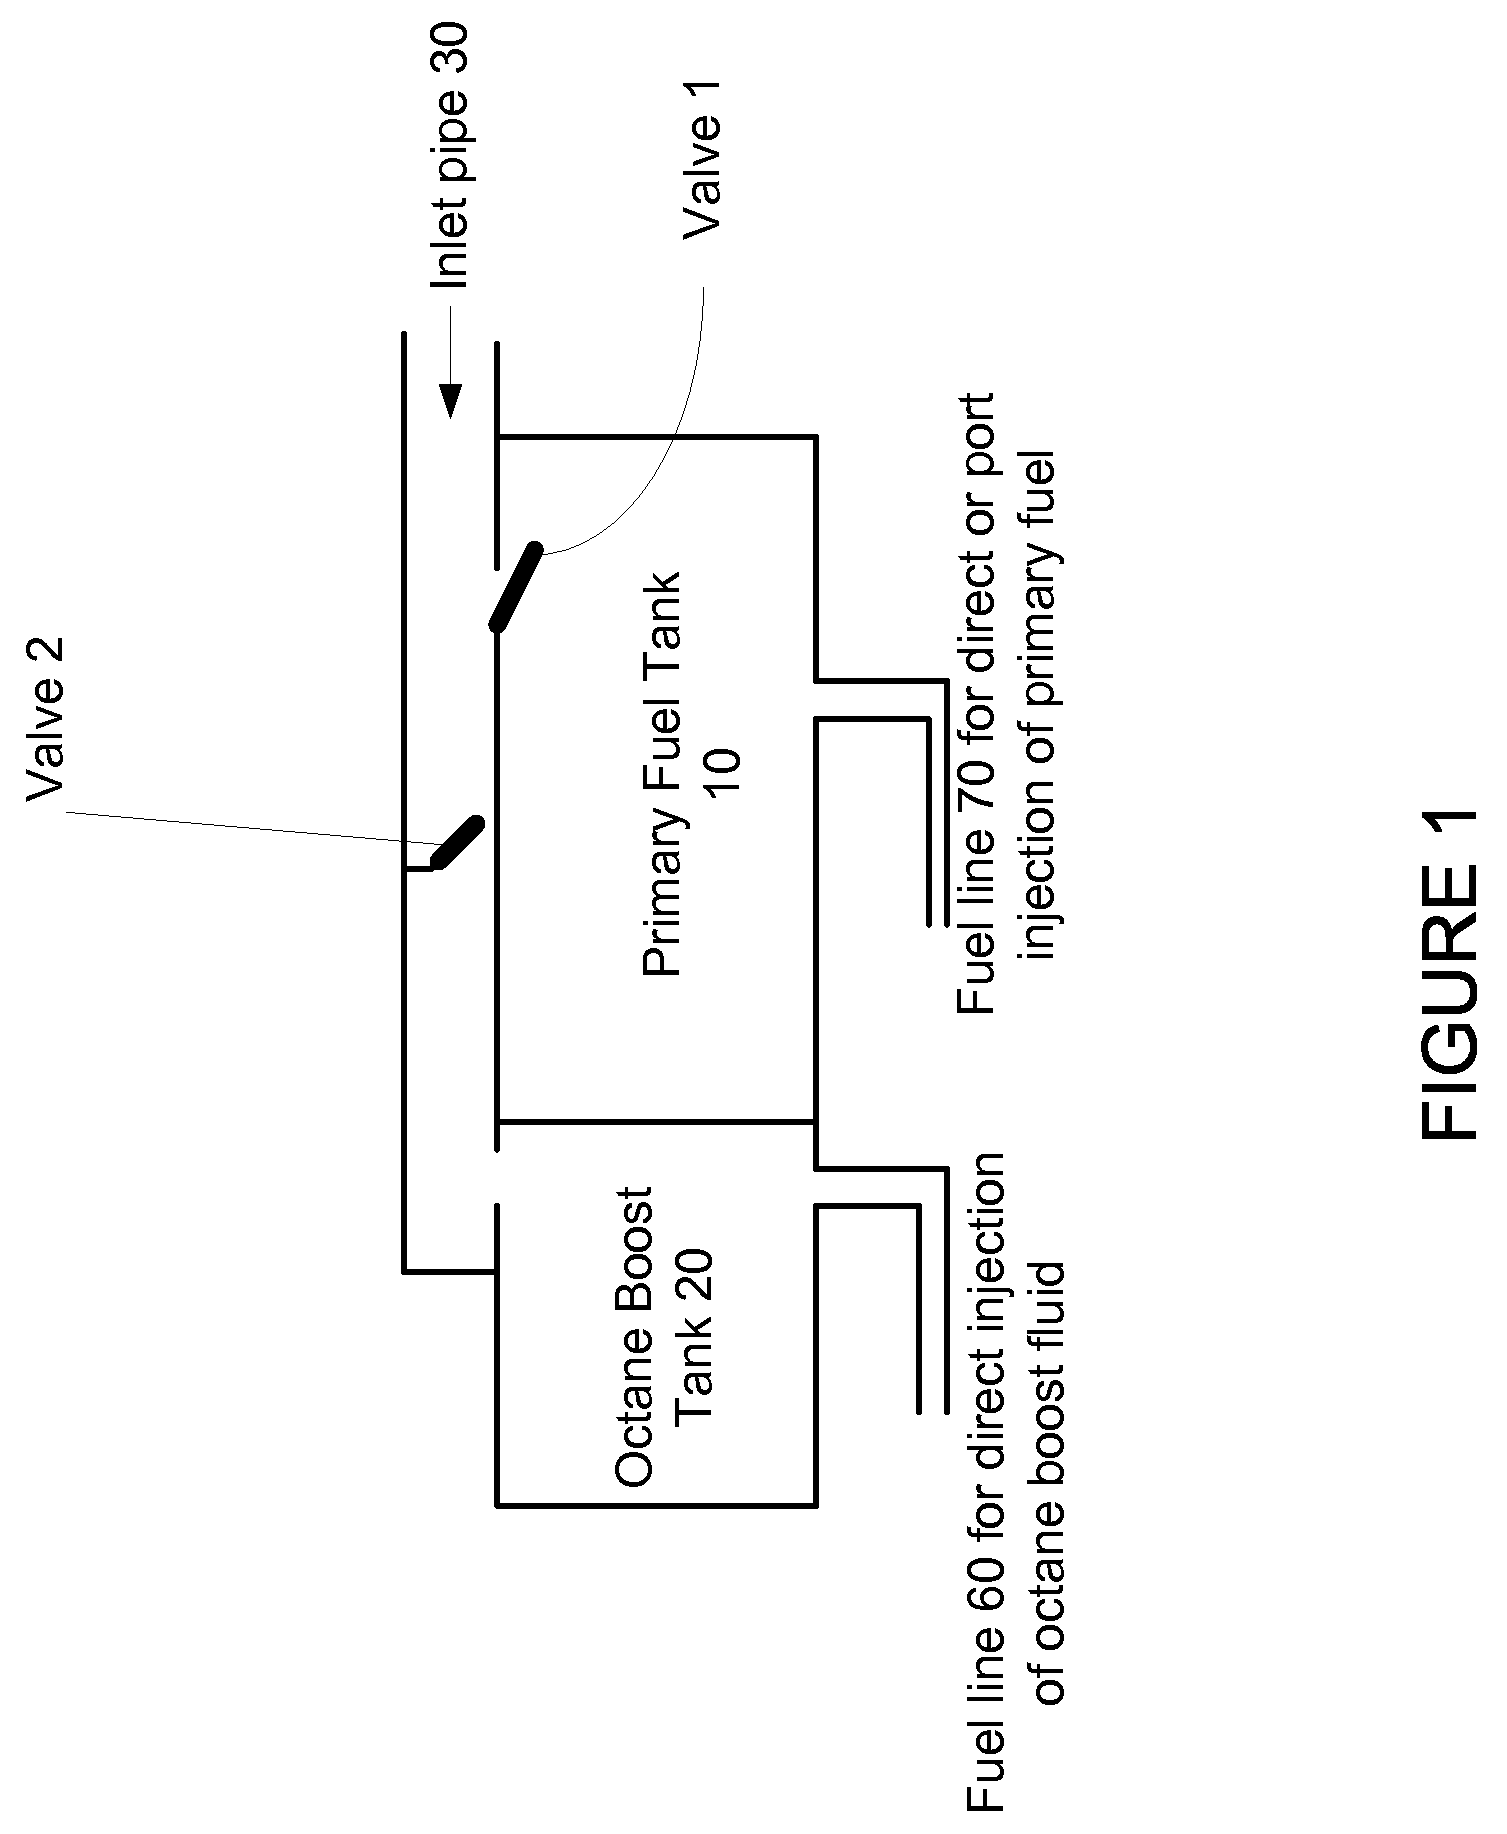 Fuel Tank System For Gasoline And Flexible Ethanol Powered Vehicles Using On-Demand Direct Ethanol Injection Octane Boost